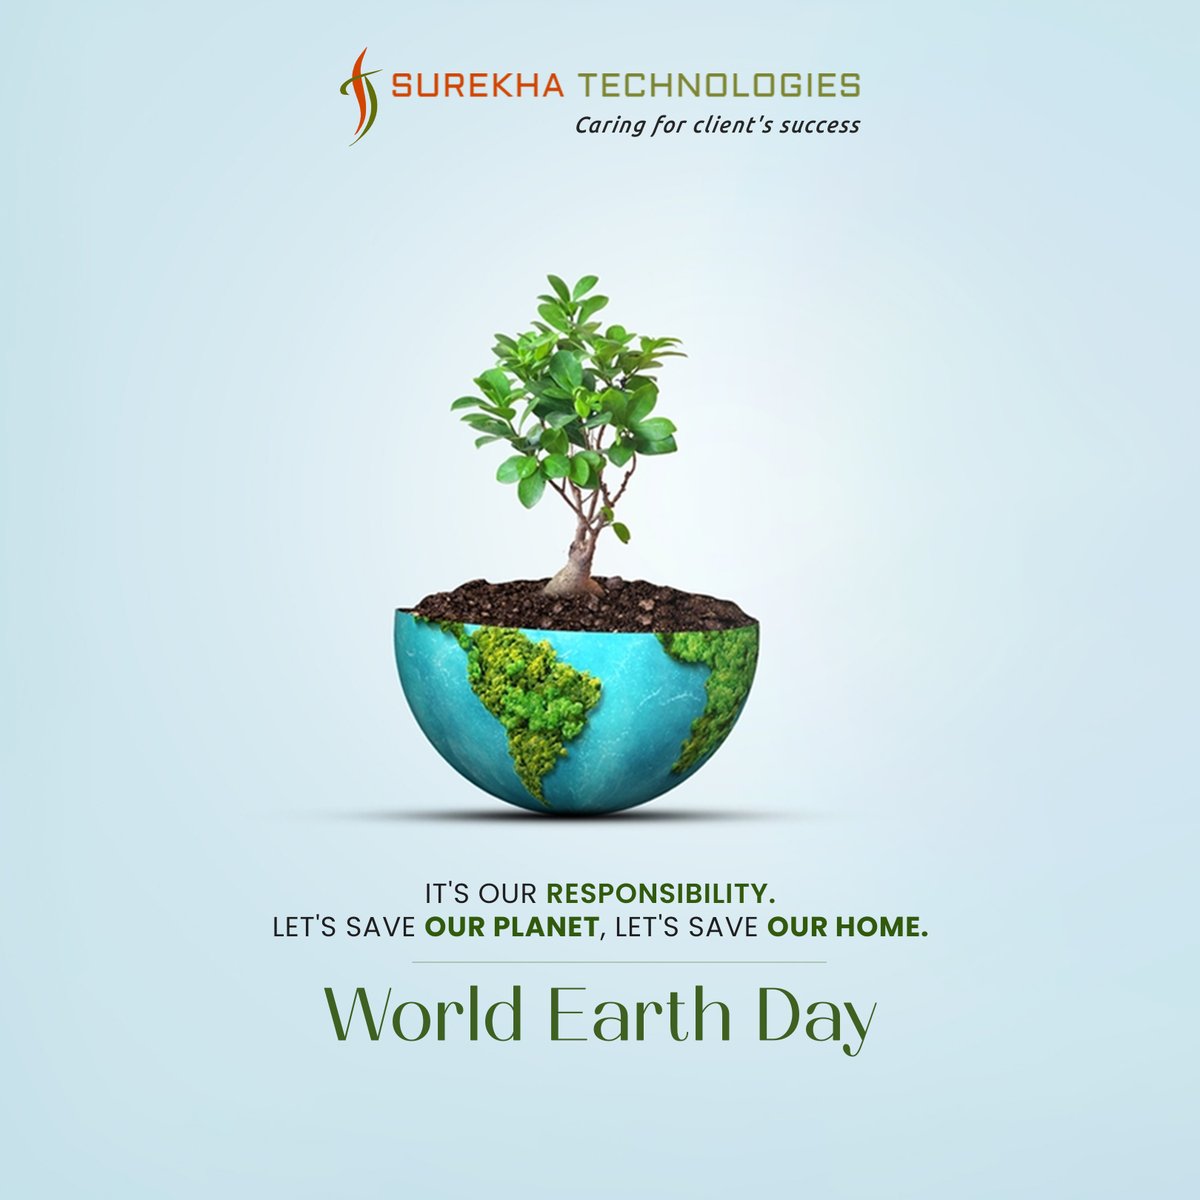 Happy Earth Day! At #SurekhaTech, we believe it's our responsibility to protect the planet. There are many ways to be more sustainable, from planting trees to reducing your consumption of fossil fuels. What are you doing this #EarthDay to make a difference? #EarthDay2024 #CSR